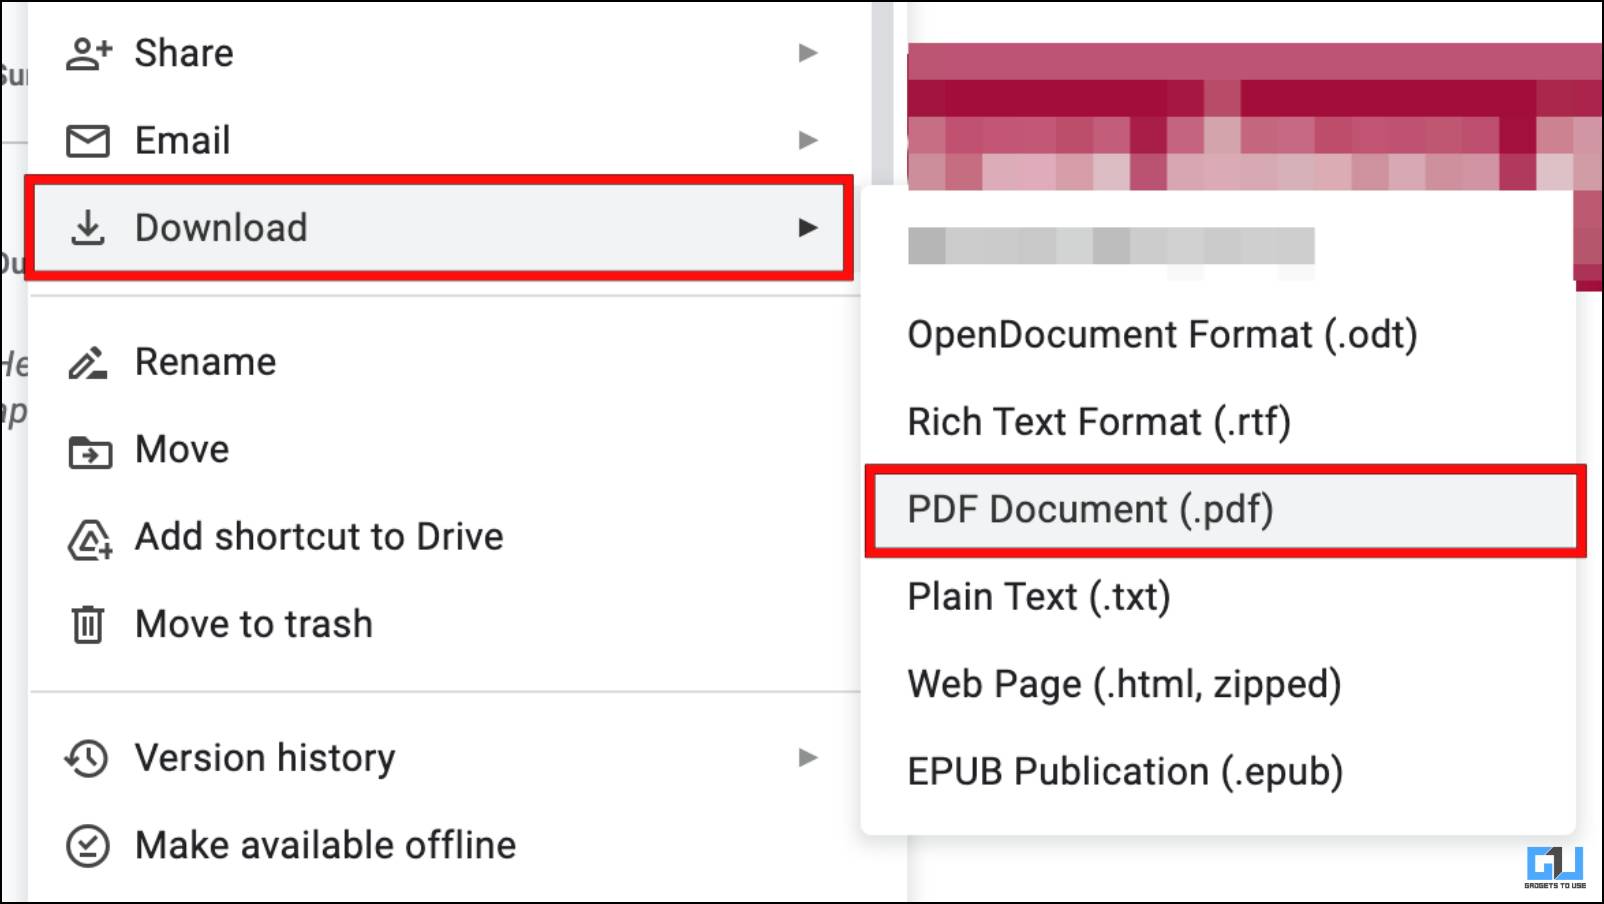 Download File as PDF from Google Docs